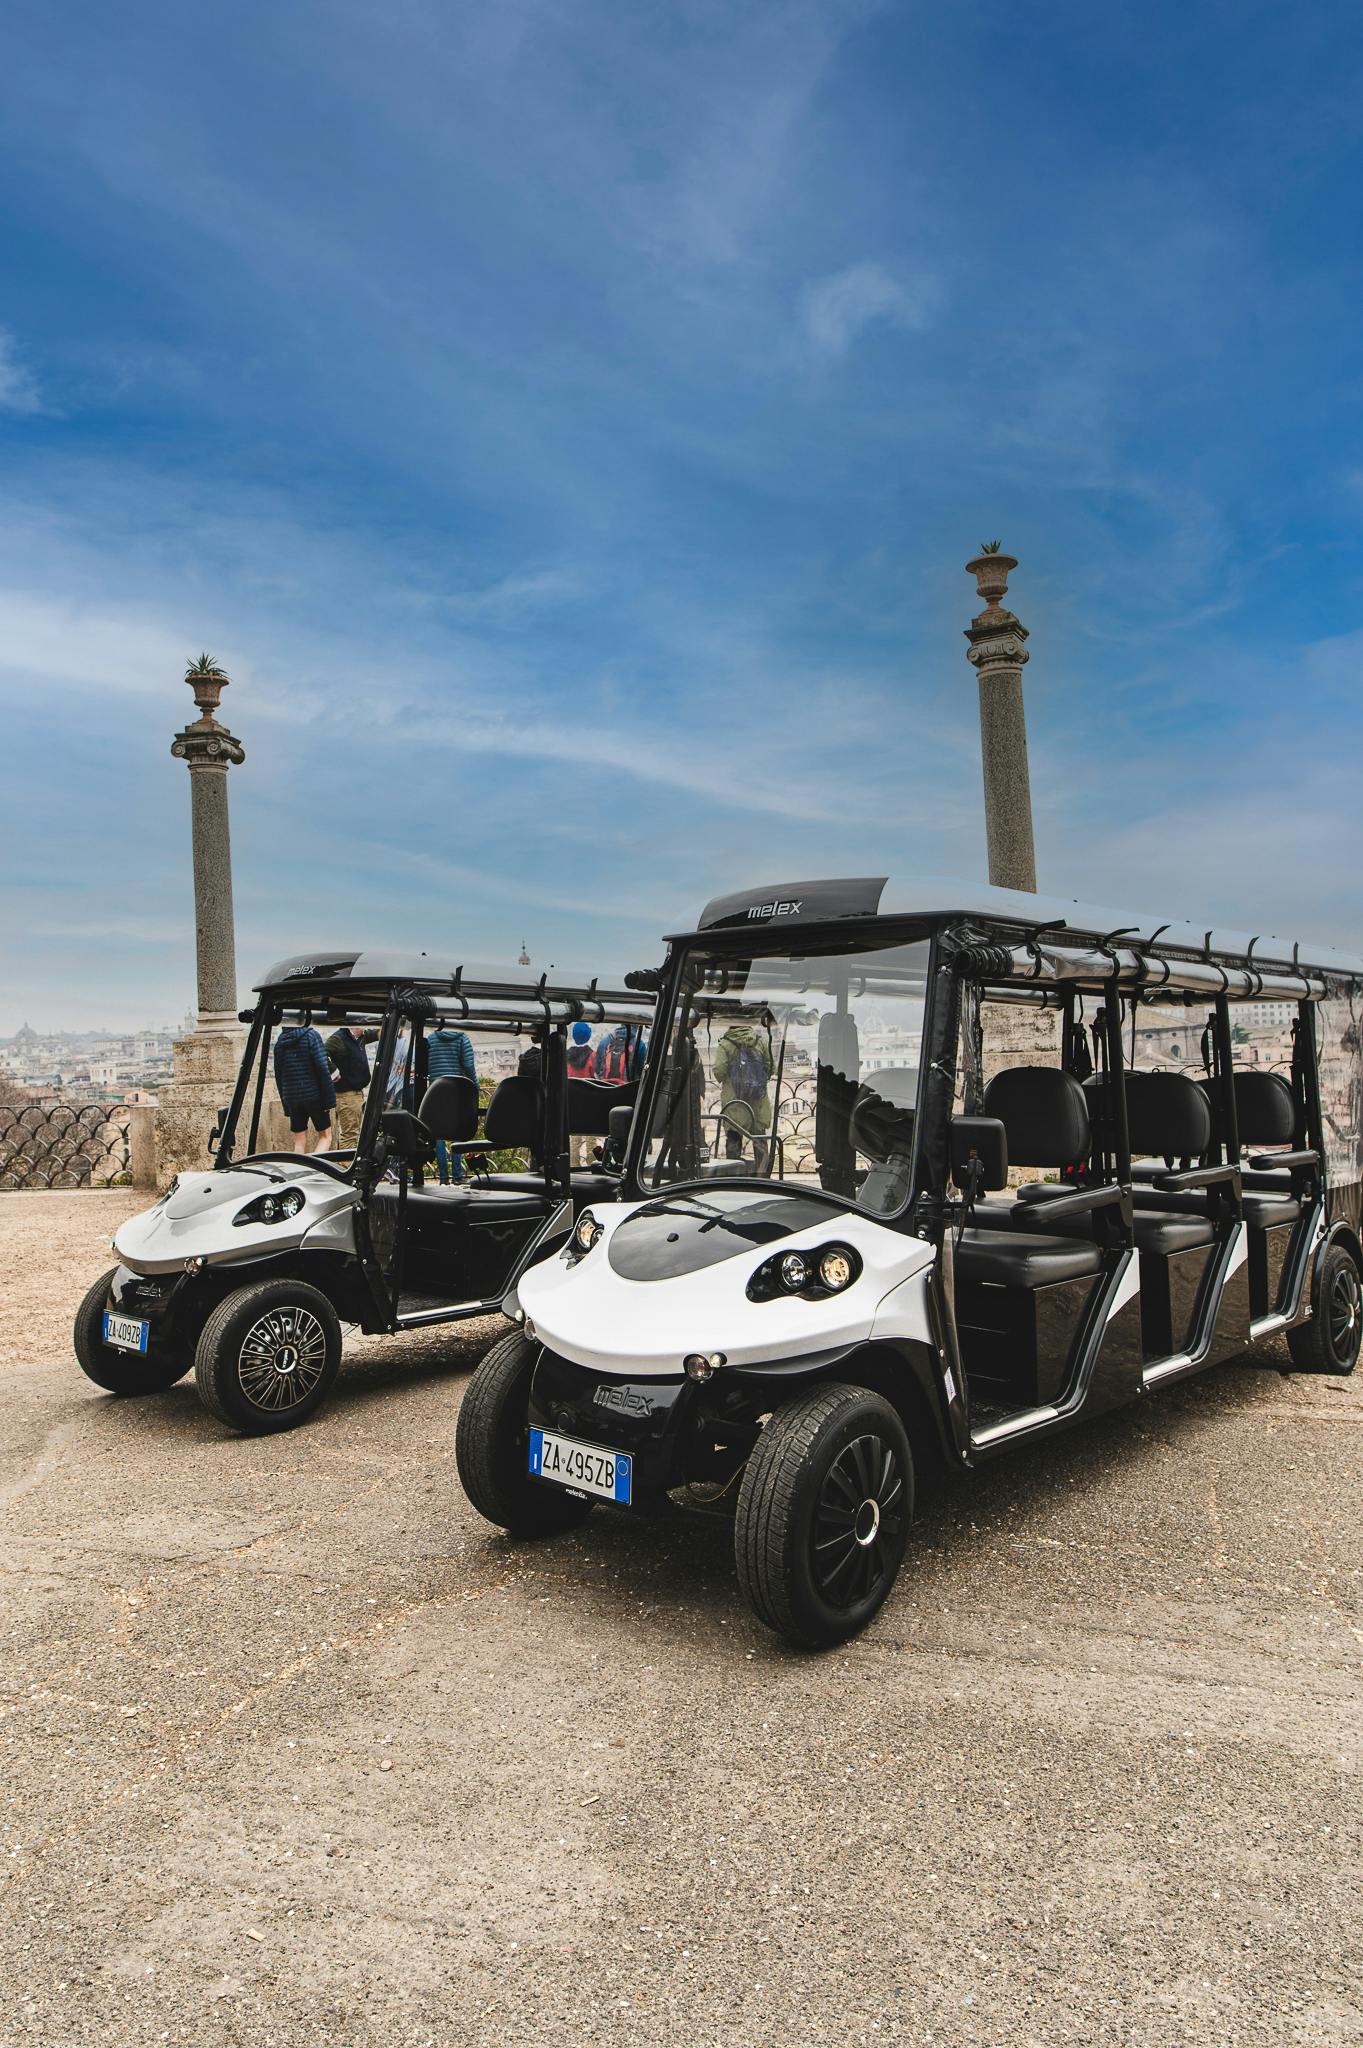 Rome city highlights guided tour by golf cart